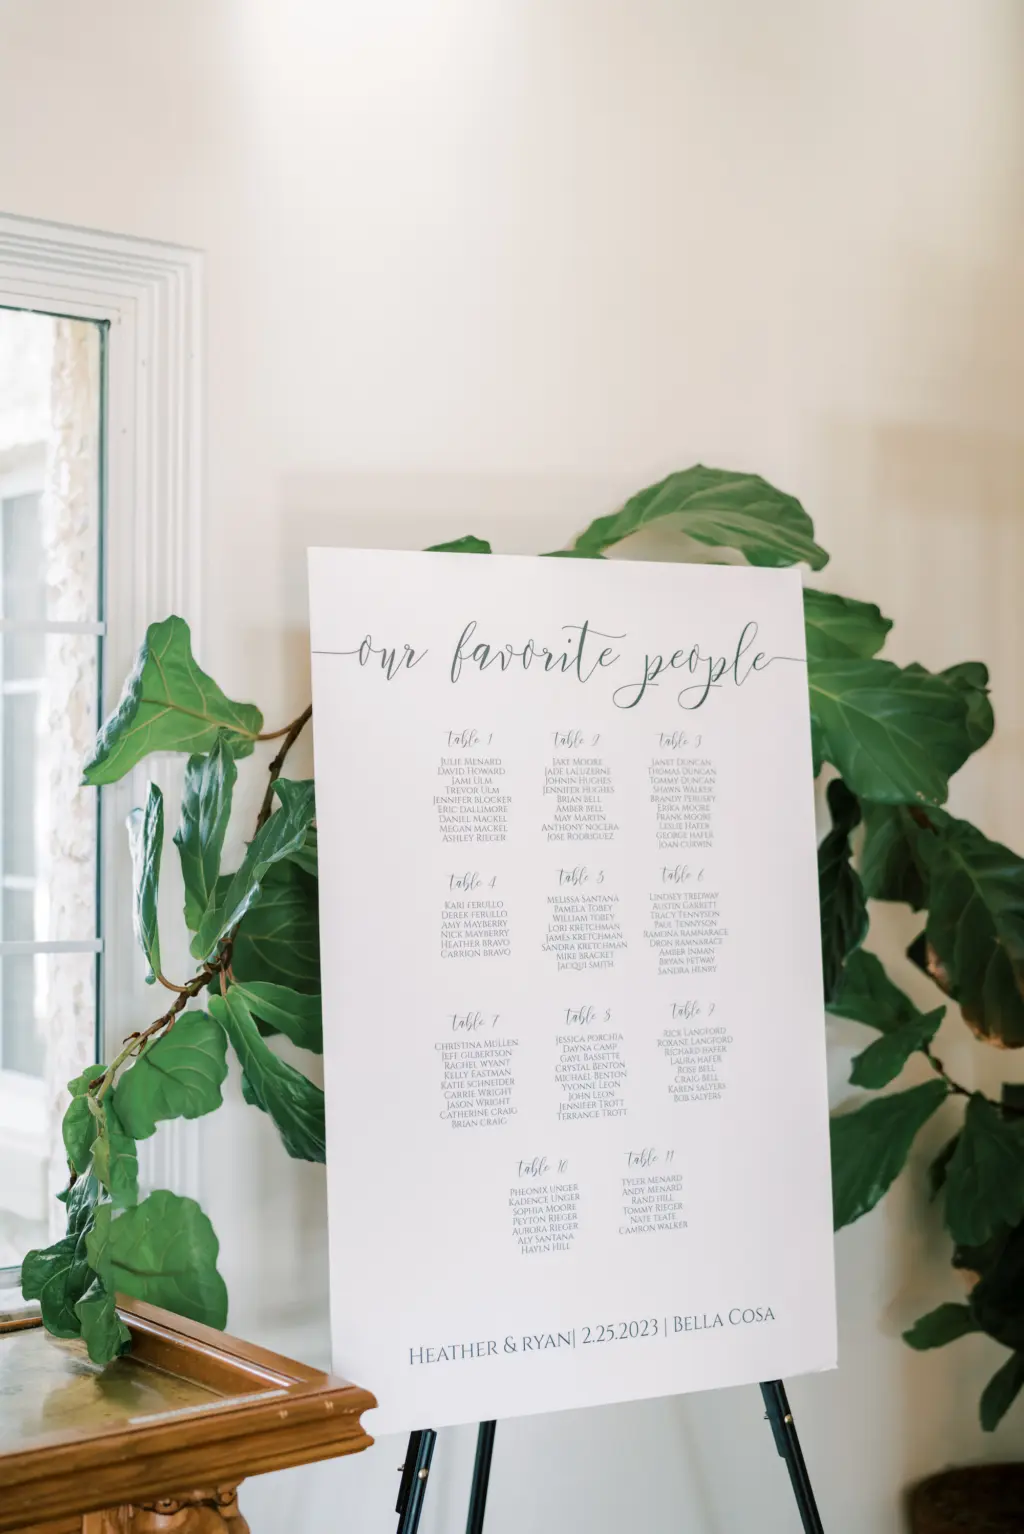 Our Favorite People Wedding Reception Seating Chart Inspiration